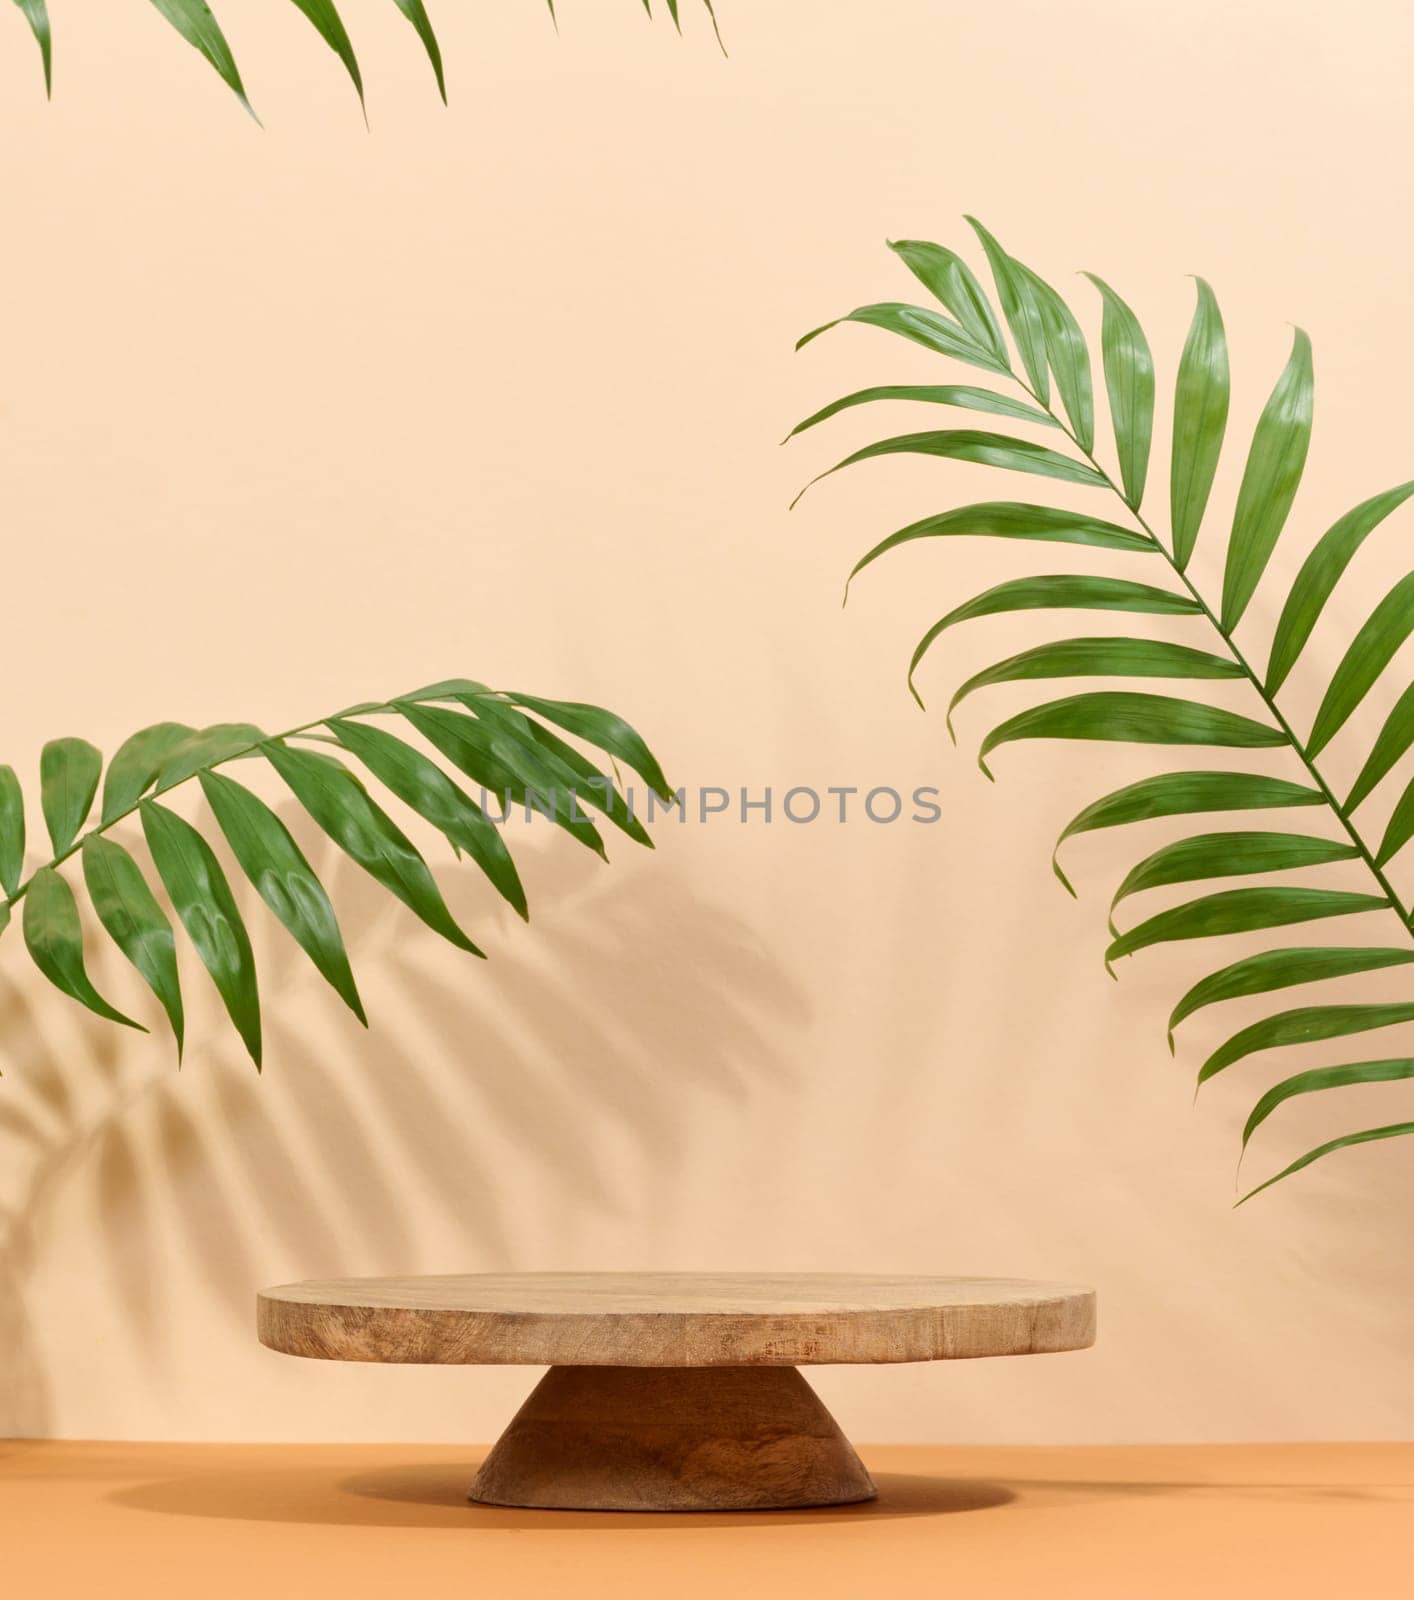 Round brown wooden stand on a white background, a place to display cosmetics and products